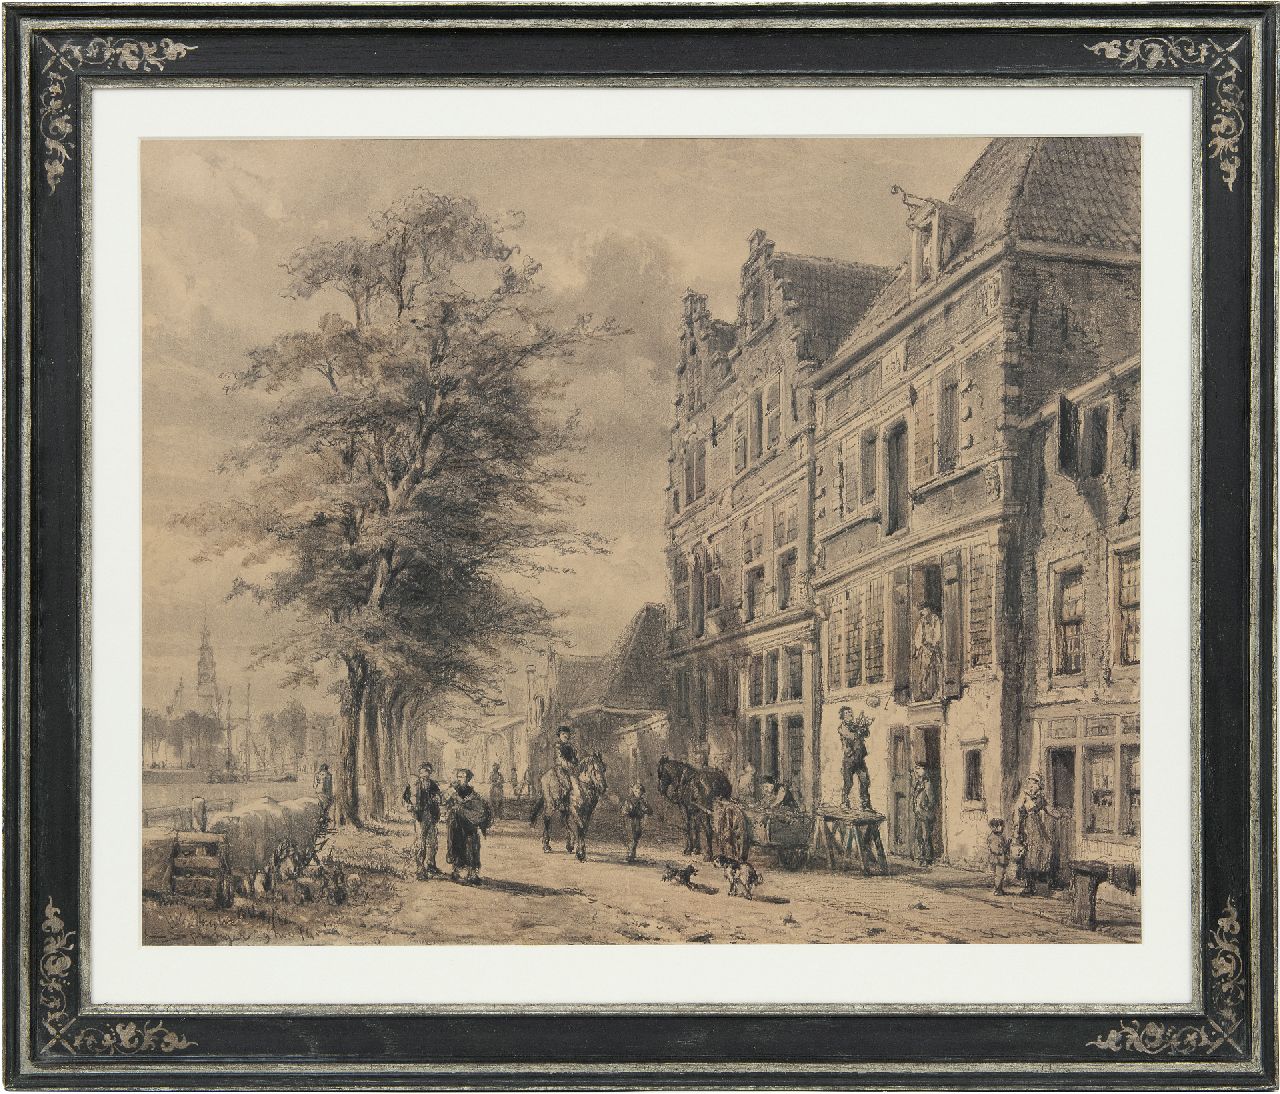 Springer C.  | Cornelis Springer | Watercolours and drawings offered for sale | The Doelenkade in Hoorn, Holland, in summer, charcoal on paper 51.2 x 63.5 cm, signed l.l. and dated 29 nov. '74